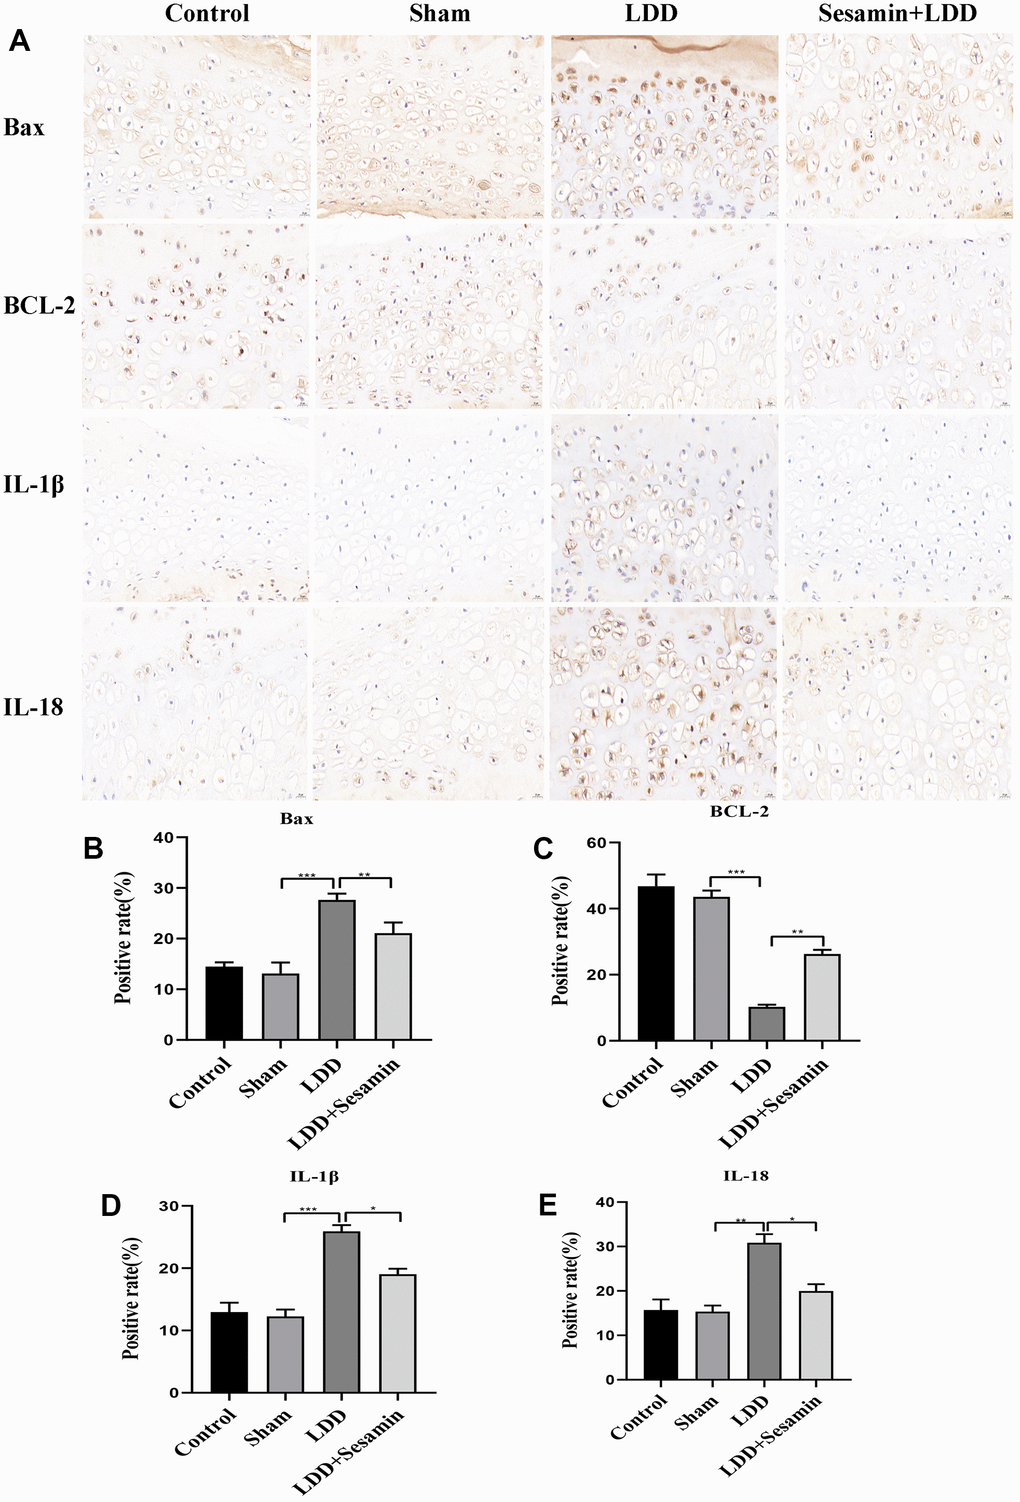 Apoptosis was inhibited by Sesamin treatment in puncture-induced rat model. (A) Bax, BCL-2, IL-1β and IL-18 were detected by immunohistochemistry (scale bar: 20 μm). (B–E) Relative positive rates were calculated by ImageJ software. All data represent mean ± SD. Three independent samples were used for statistics in all in vivo experiments. * p p p 